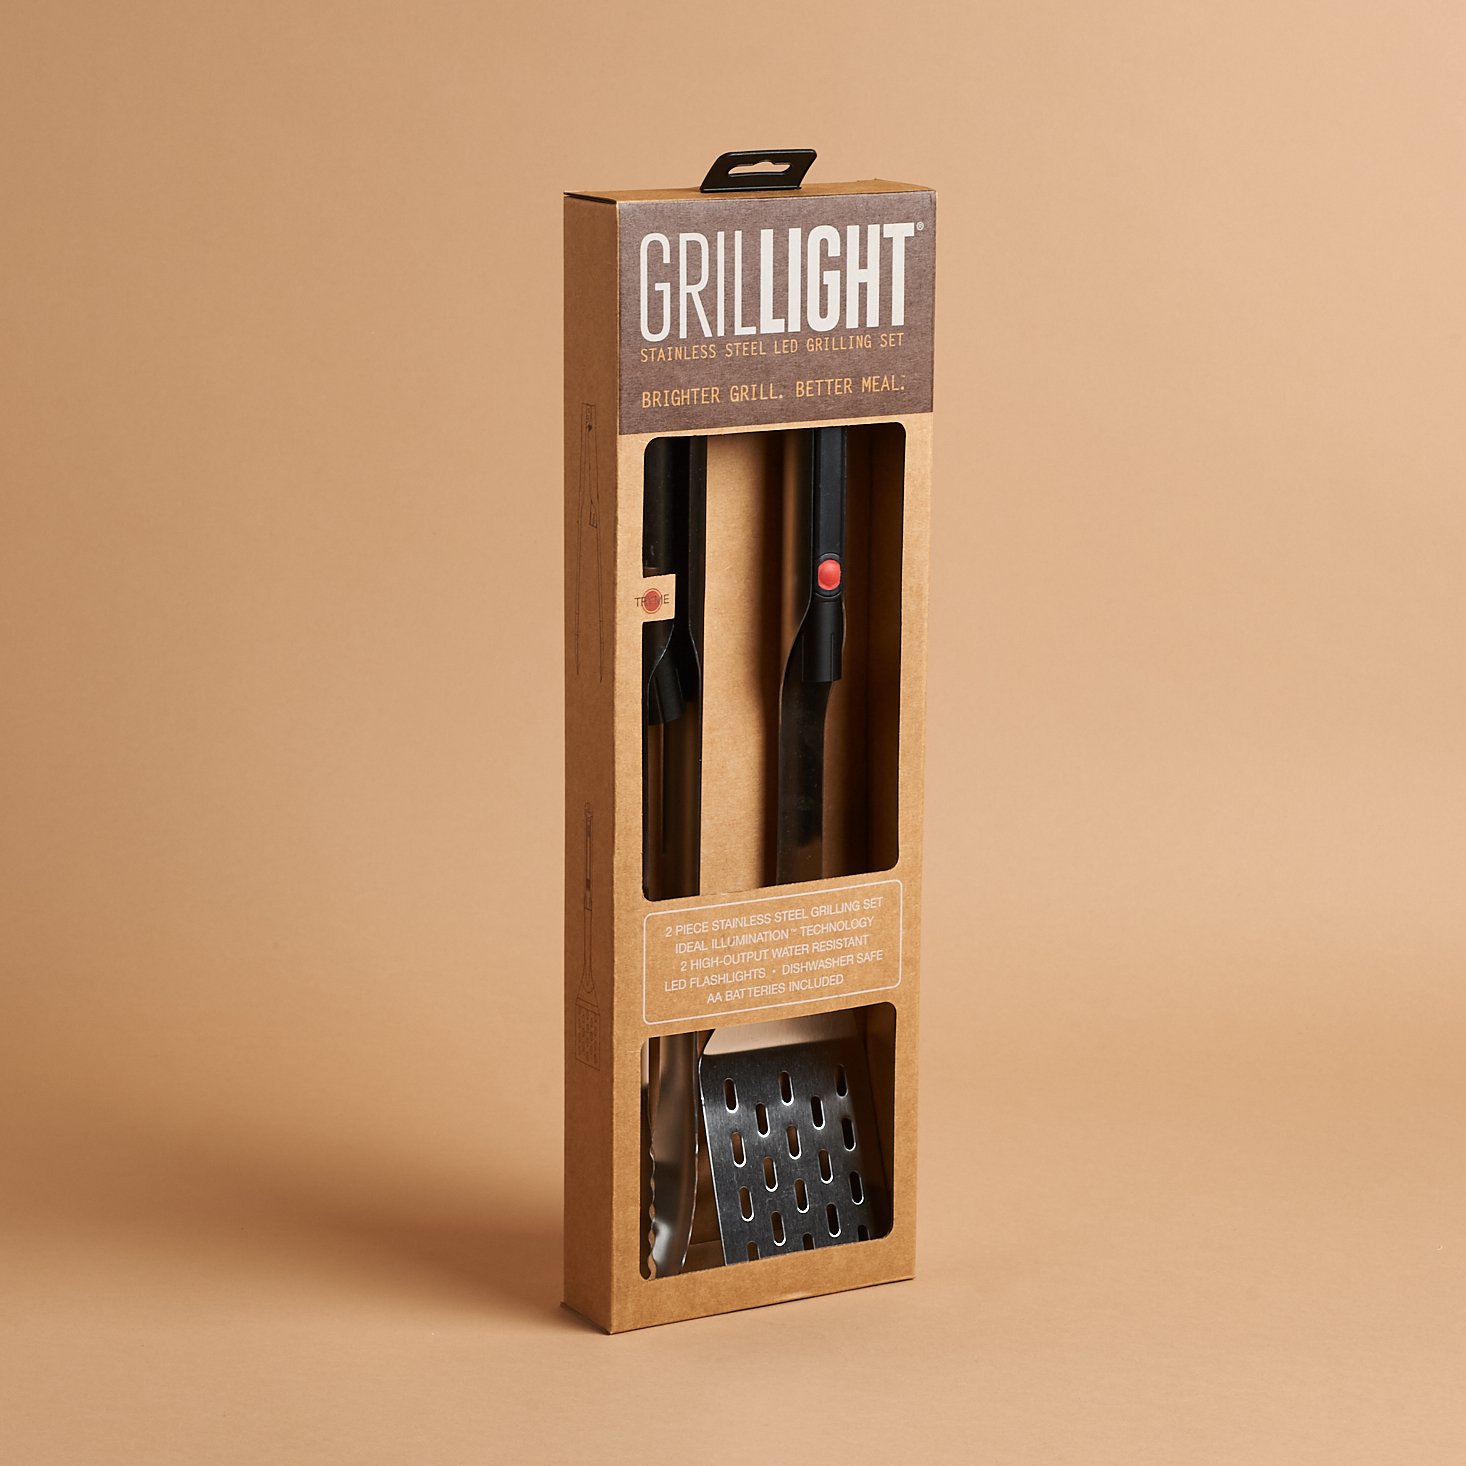 Grillight set from Breo Box Fall 2021